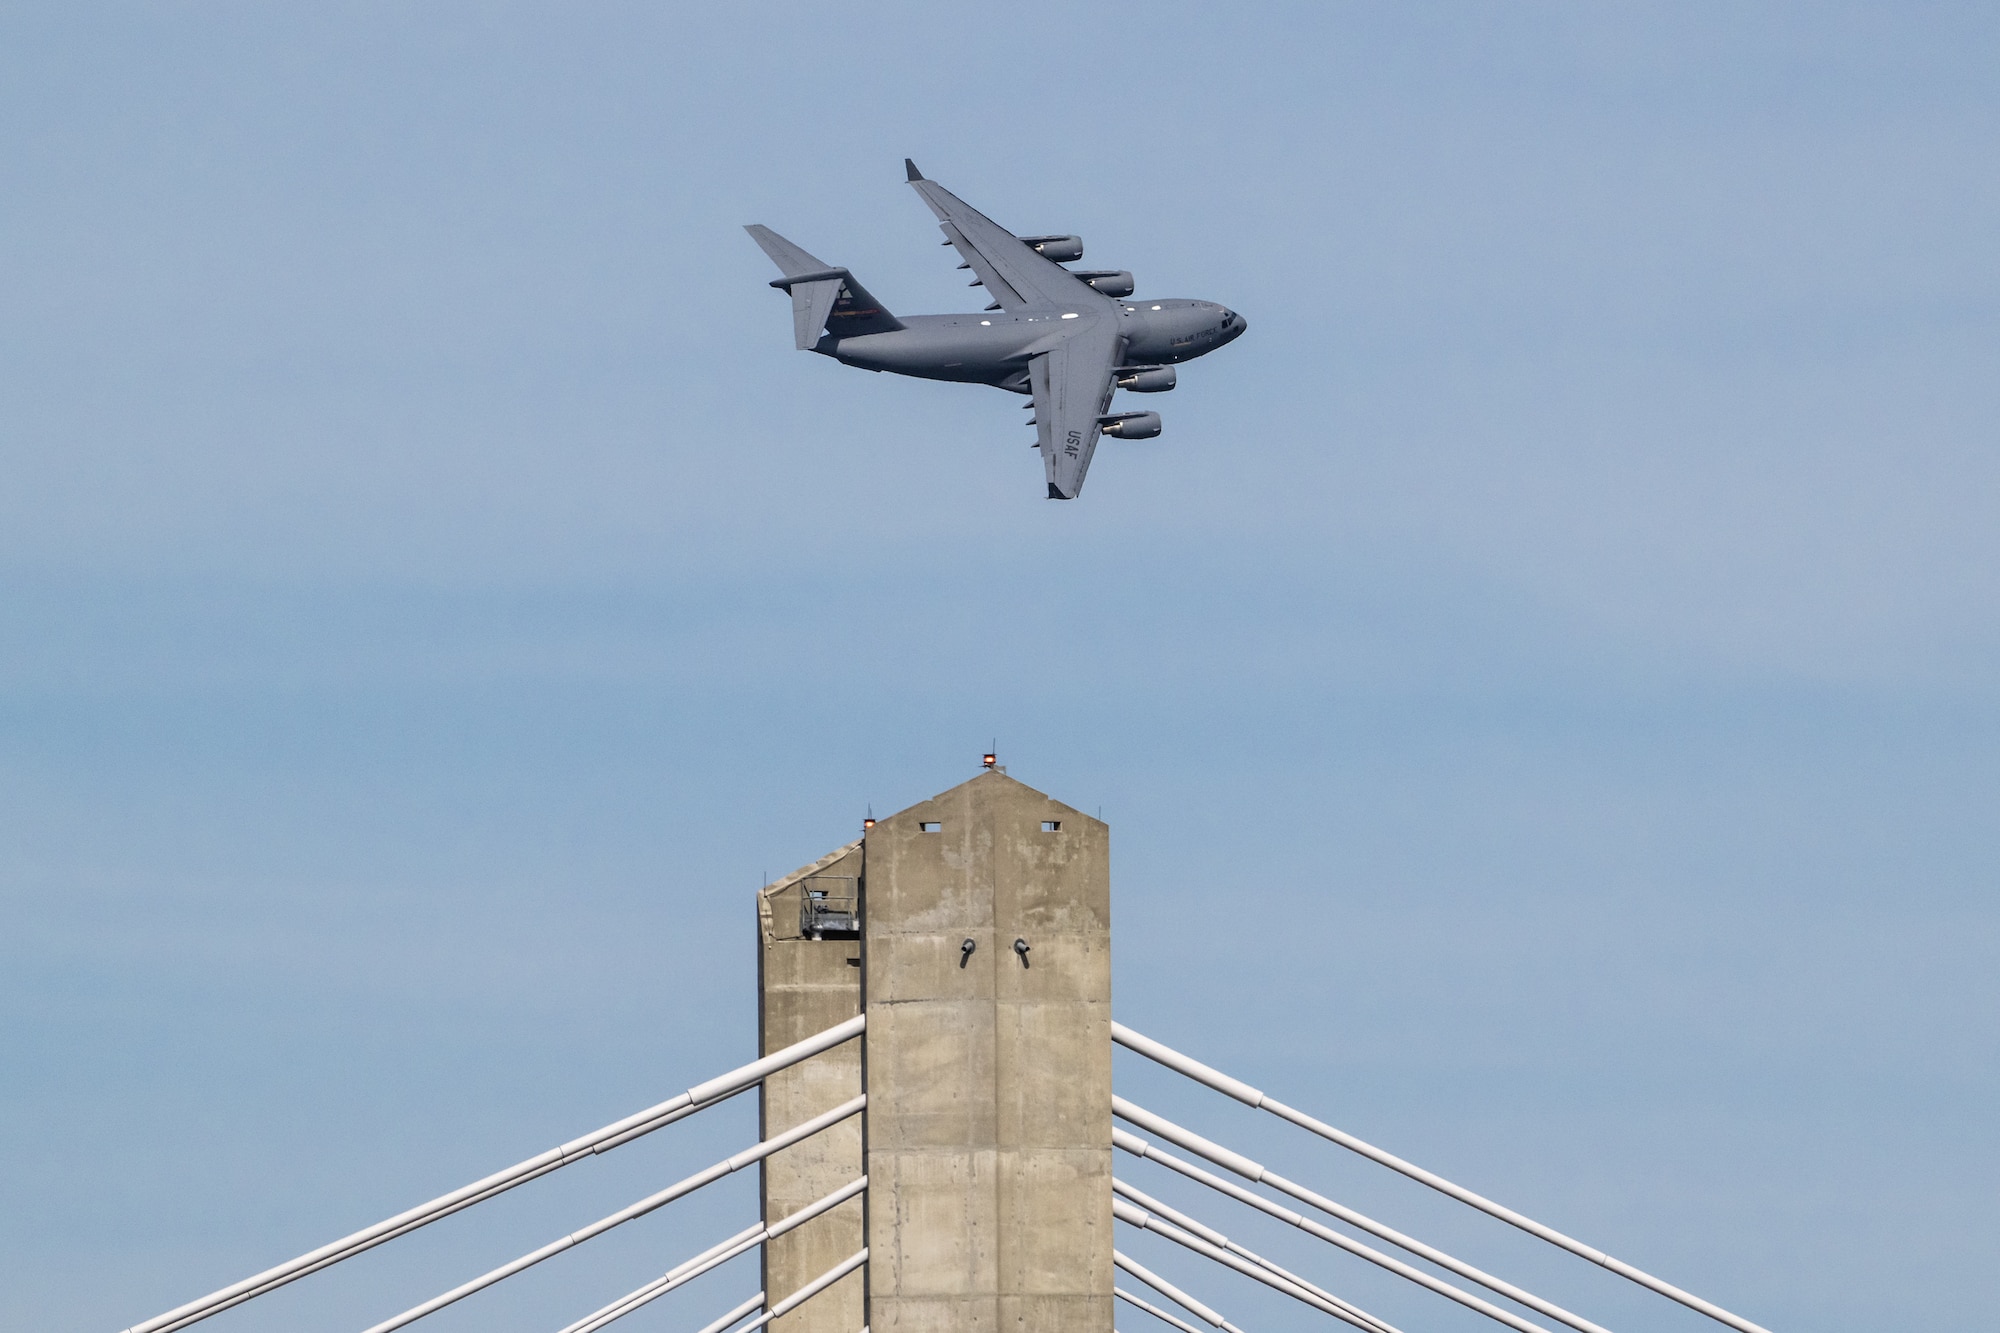 A U.S. Air Force C-17 Globemaster III from the 97th Airlift Wing at Altus Air Force Base, Okla., performs an aerobatic display during the Thunder Over Louisville air show in Louisville, Ky., April 20, 2024. This year’s event featured more than two-dozen military and civilian aircraft, including the Kentucky Air National Guard’s C130J Super Hercules. (U.S. Air National Guard photo by Dale Greer)